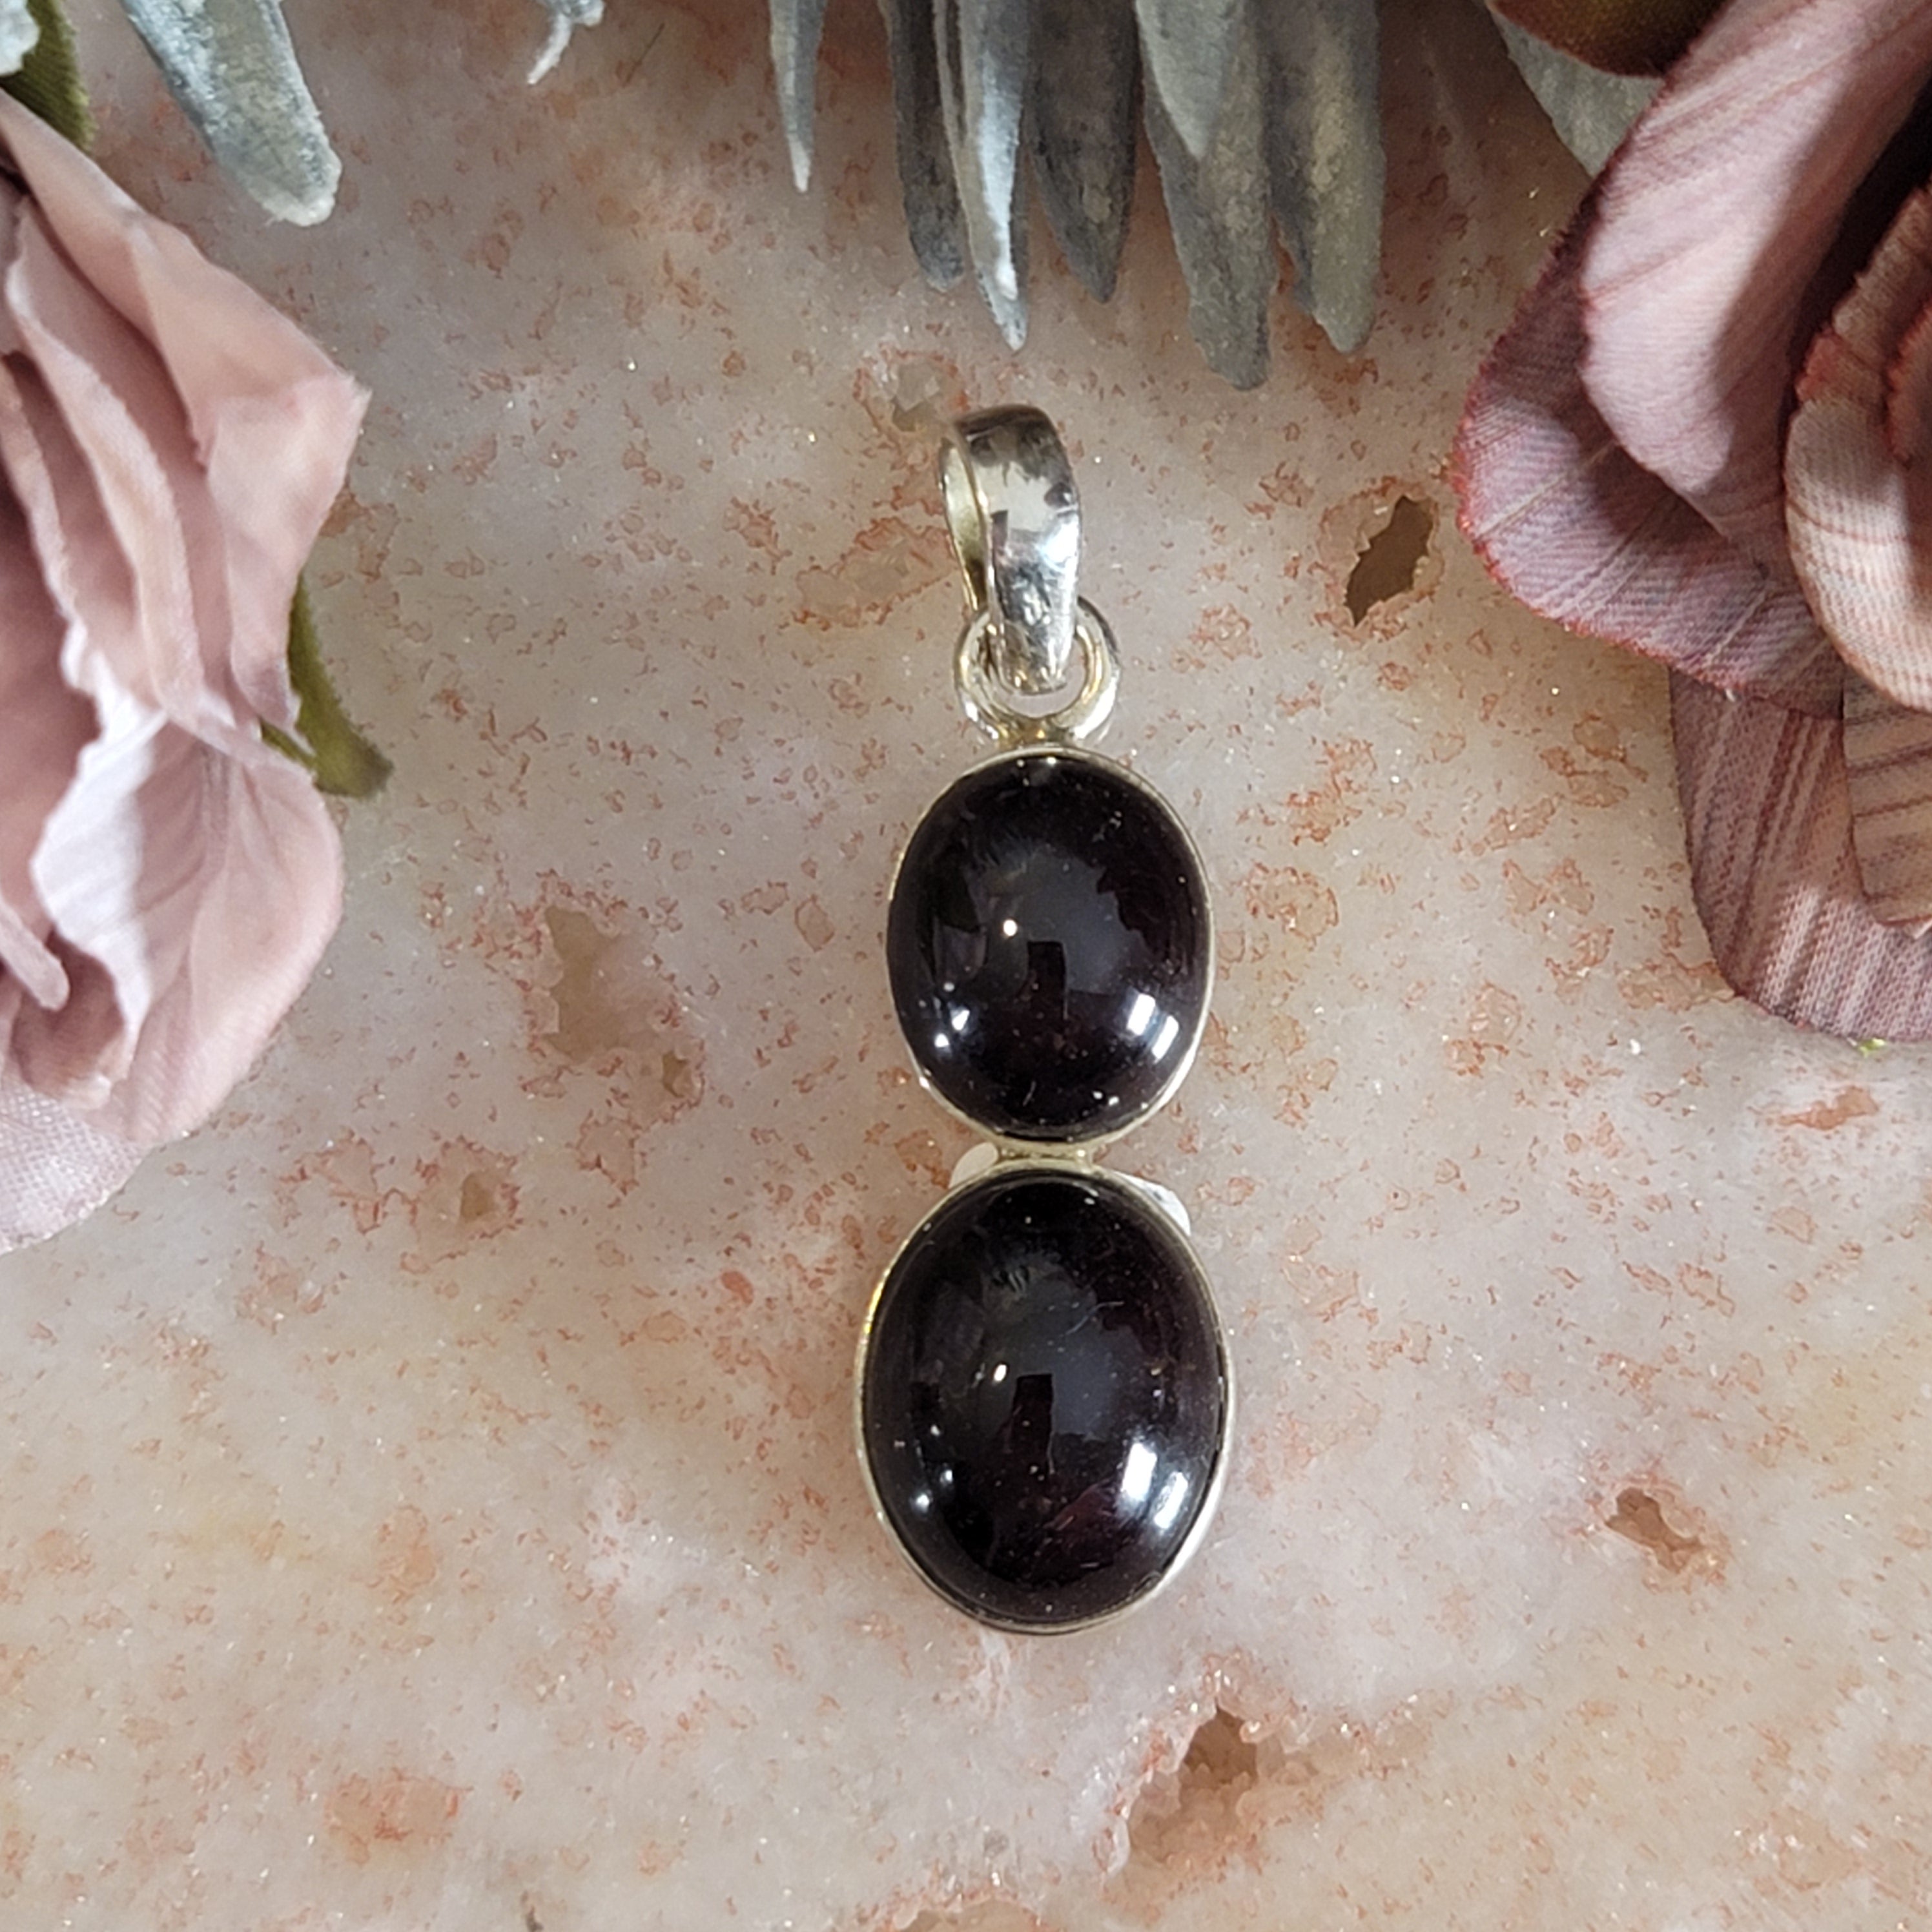 Star Garnet Pendant .925 Silver for Health, Grounding and Protection